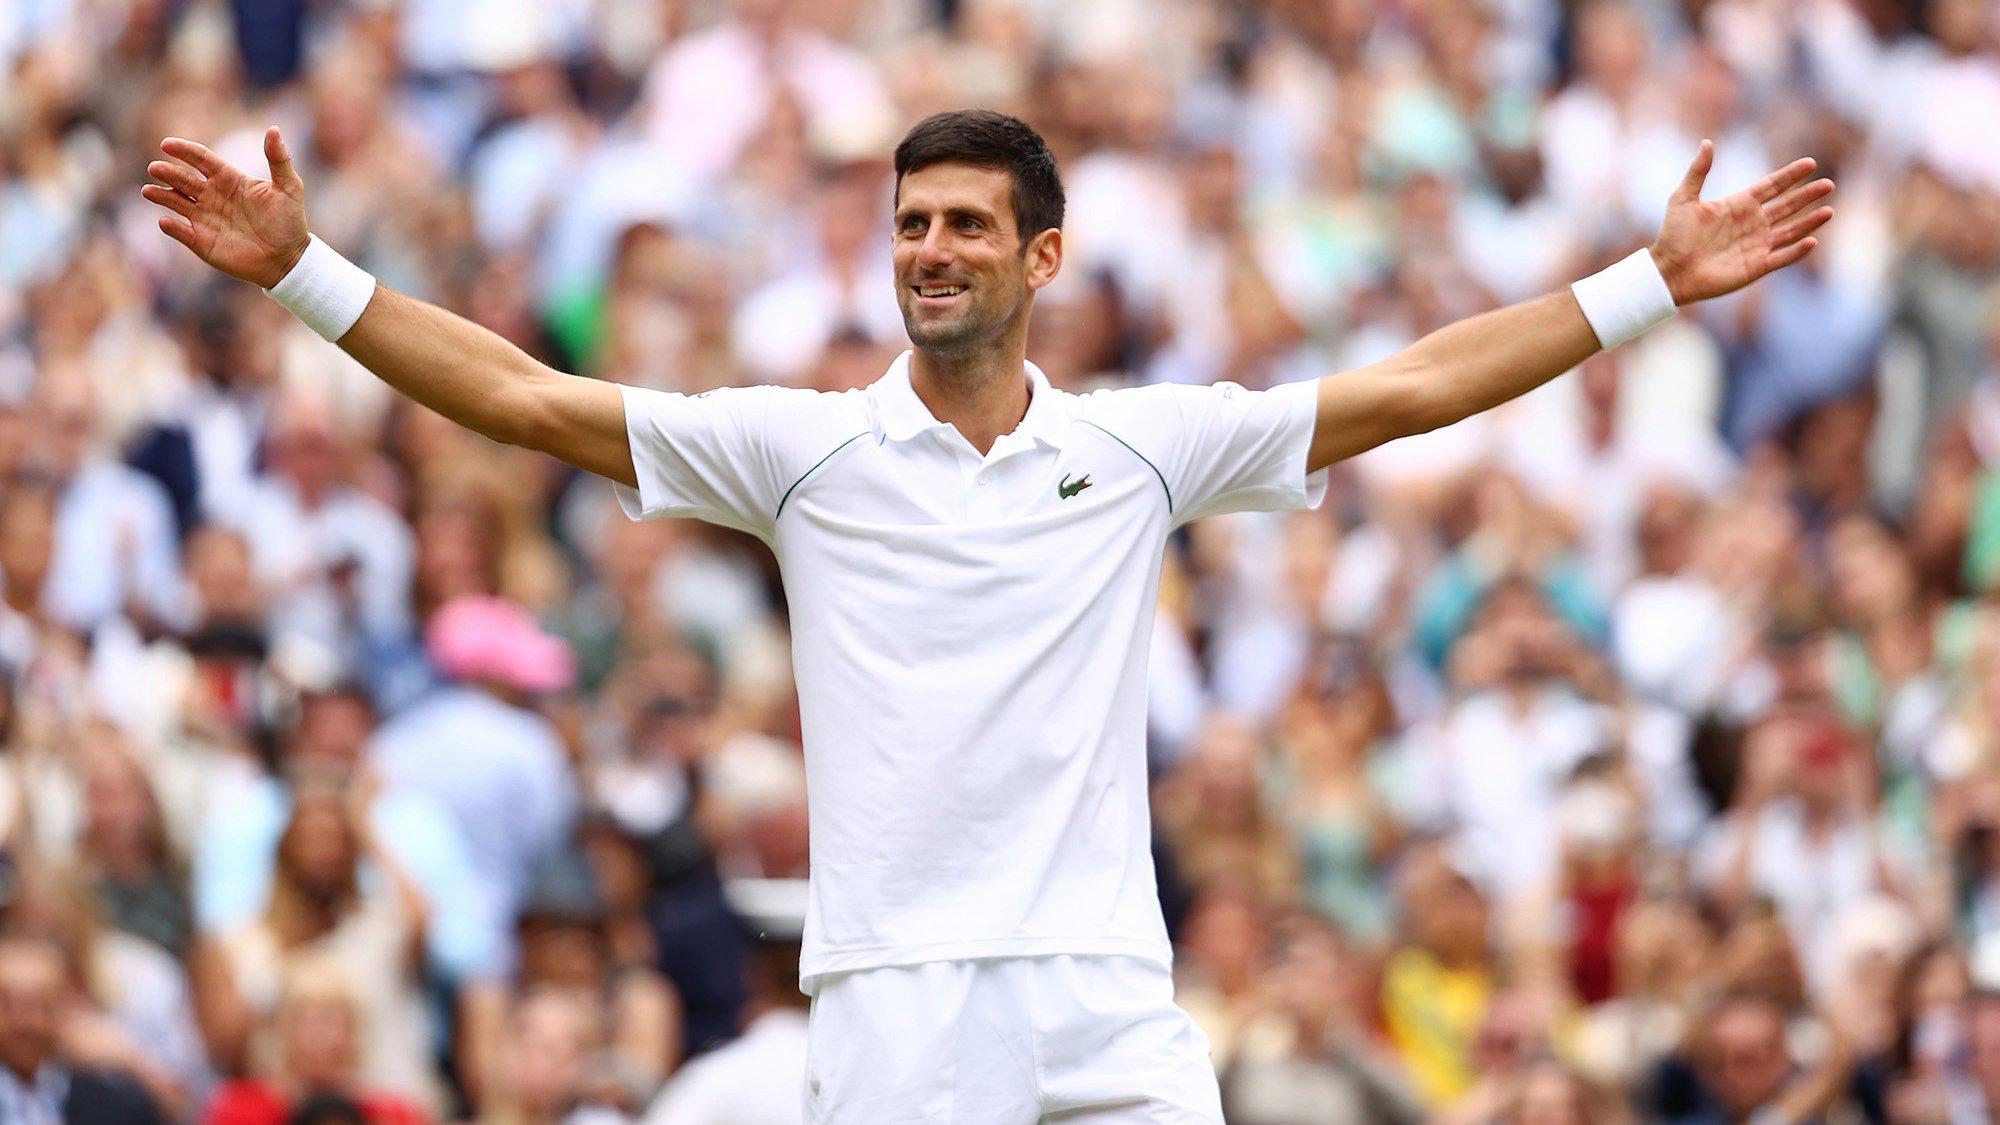 US Open Odds: Never too early to (d)jump on decent Djokovic value as Novak approaches history